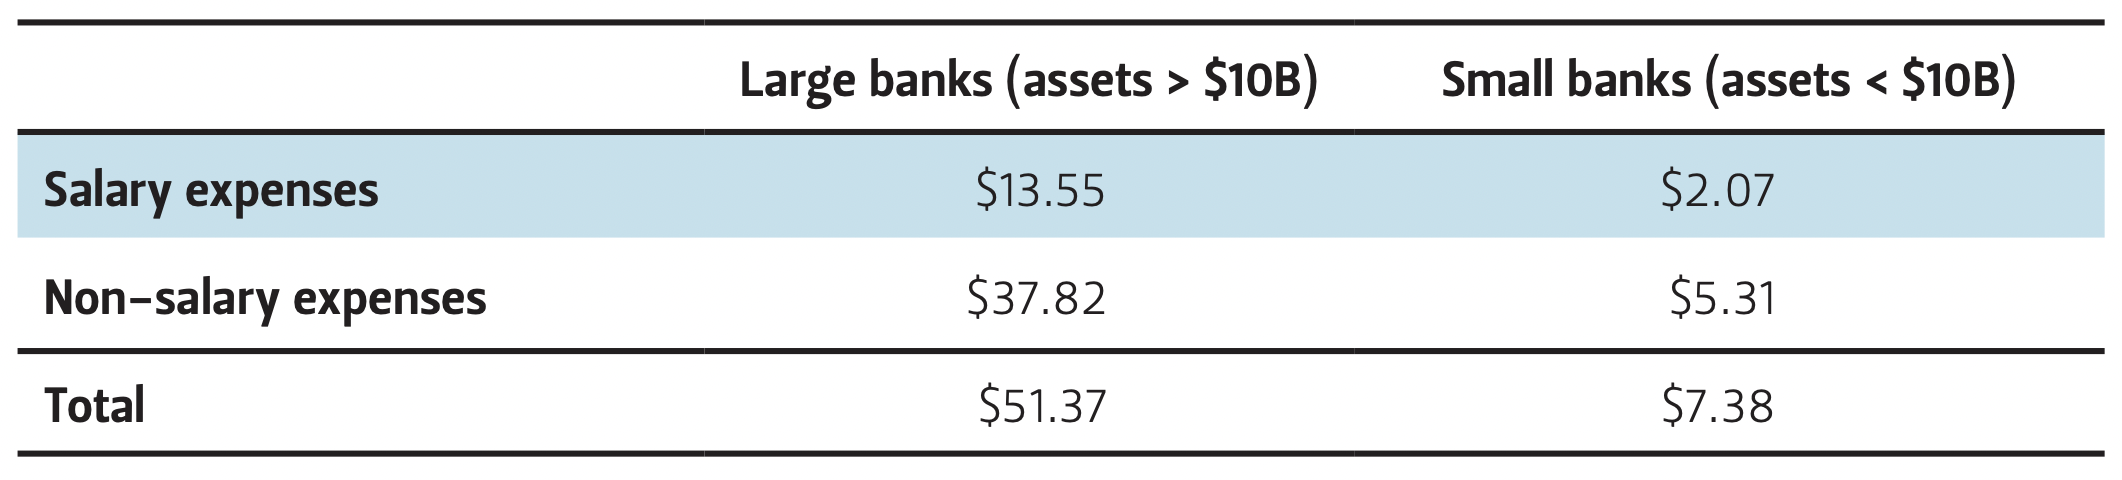 Table of expense increases at large and small banks